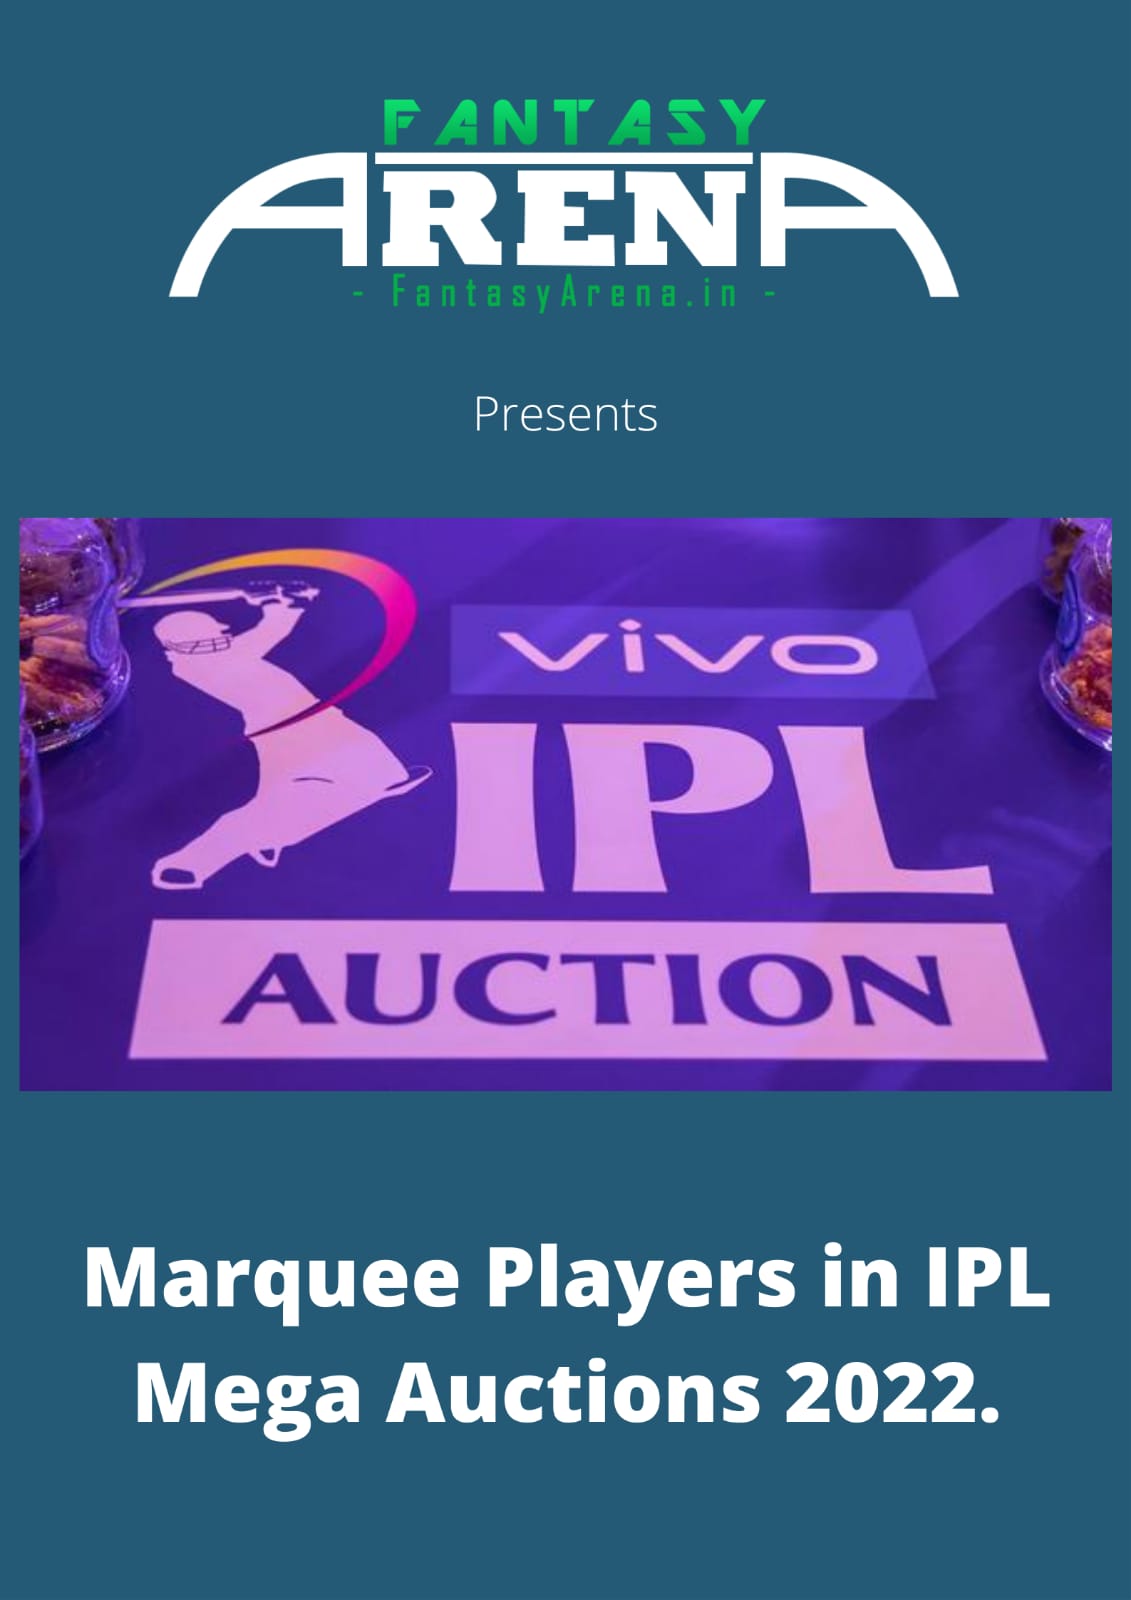 Marquee Players of IPL Mega Auctions 2022.